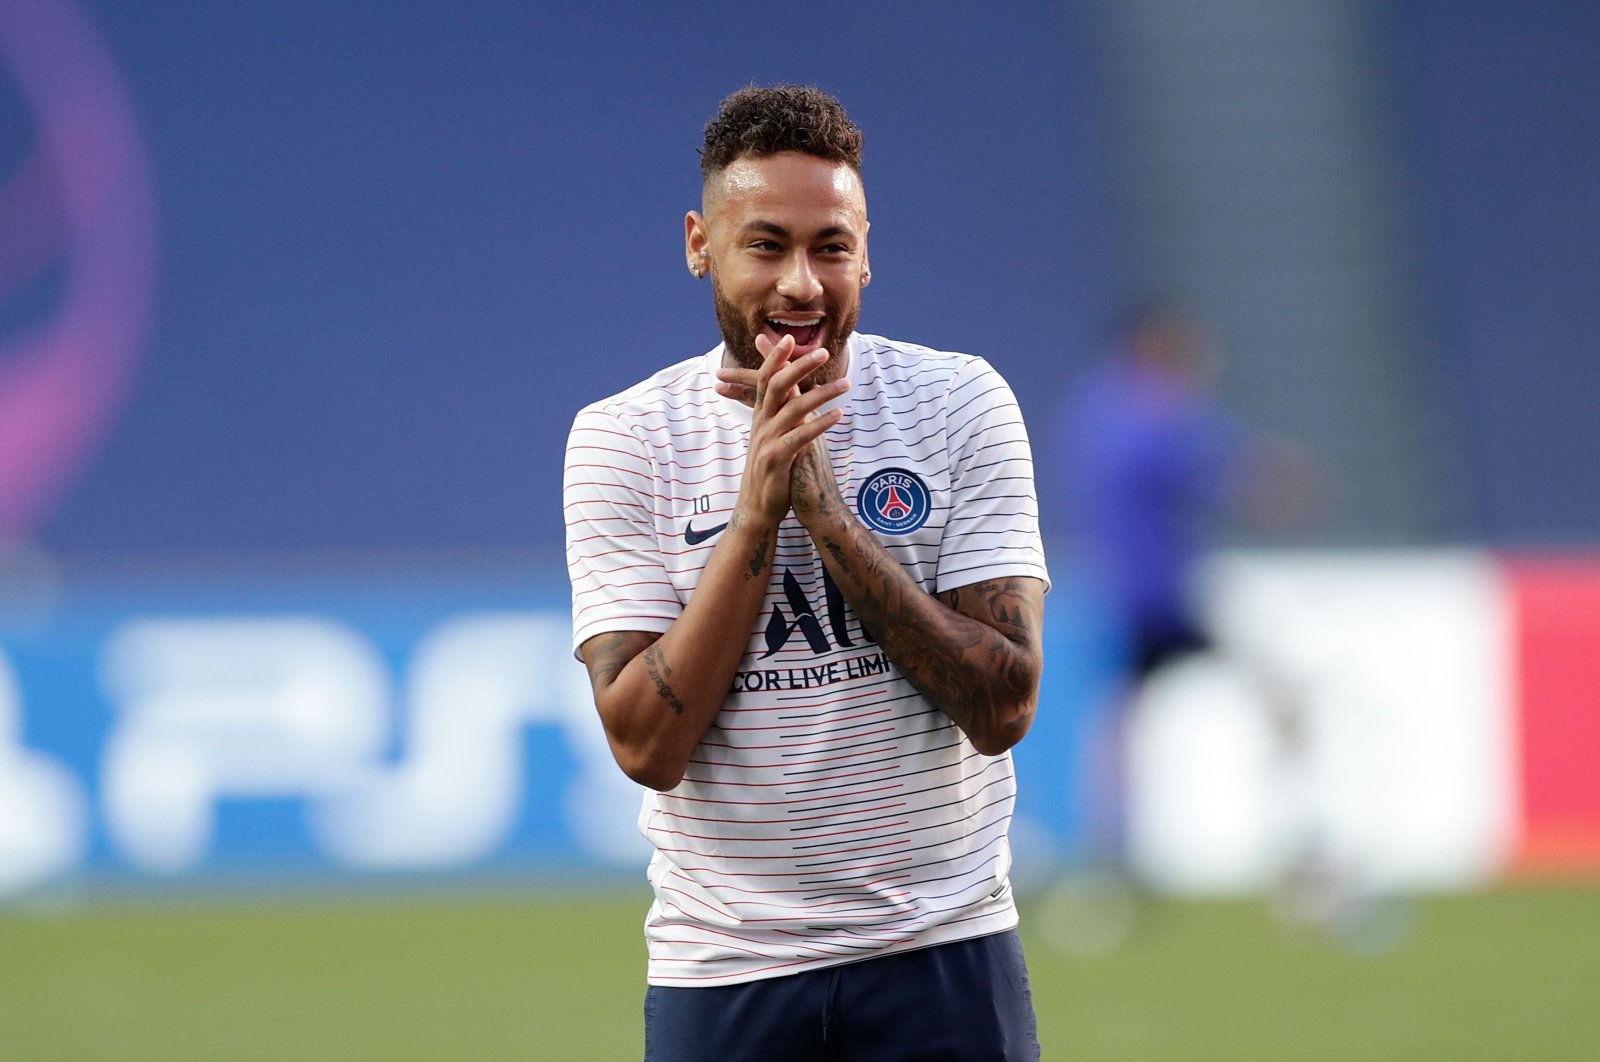 Neymar smiles as he takes part in a warmup prior to a match, Lisbon, Portugal, Aug. 18, 2020. (AFP Photo) 